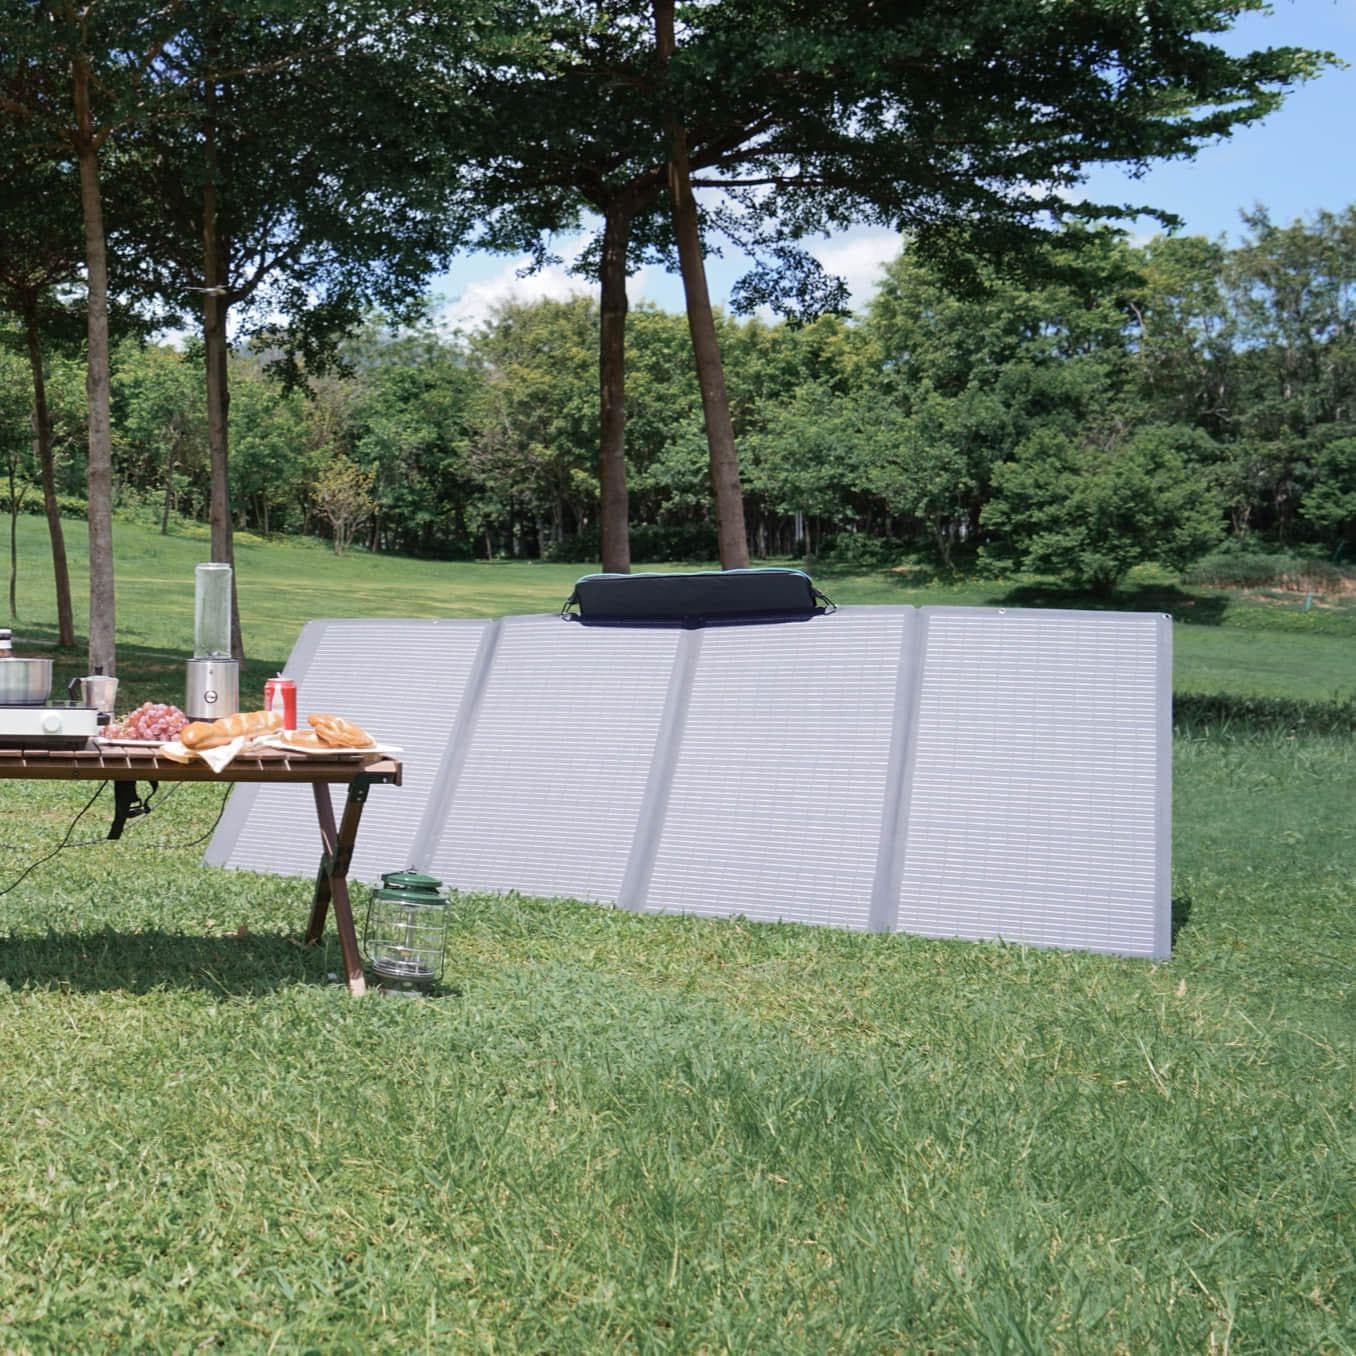 A portable solar panel, the EcoFlow 400W, is set up on a table in a grassy area.